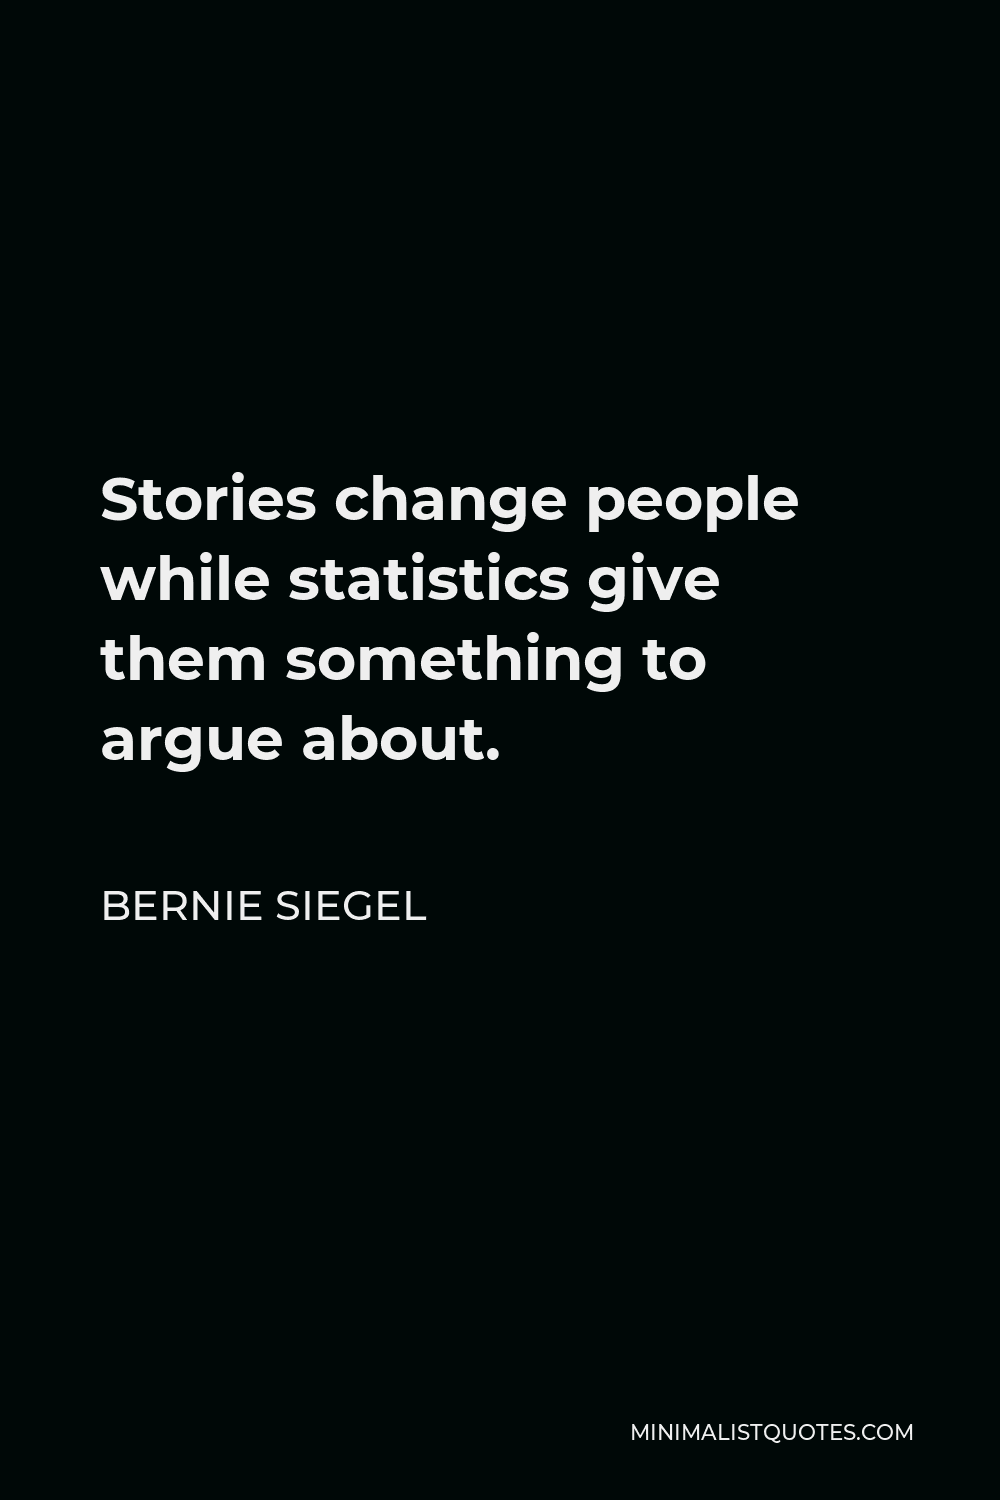 Bernie Siegel Quote - Stories change people while statistics give them something to argue about.